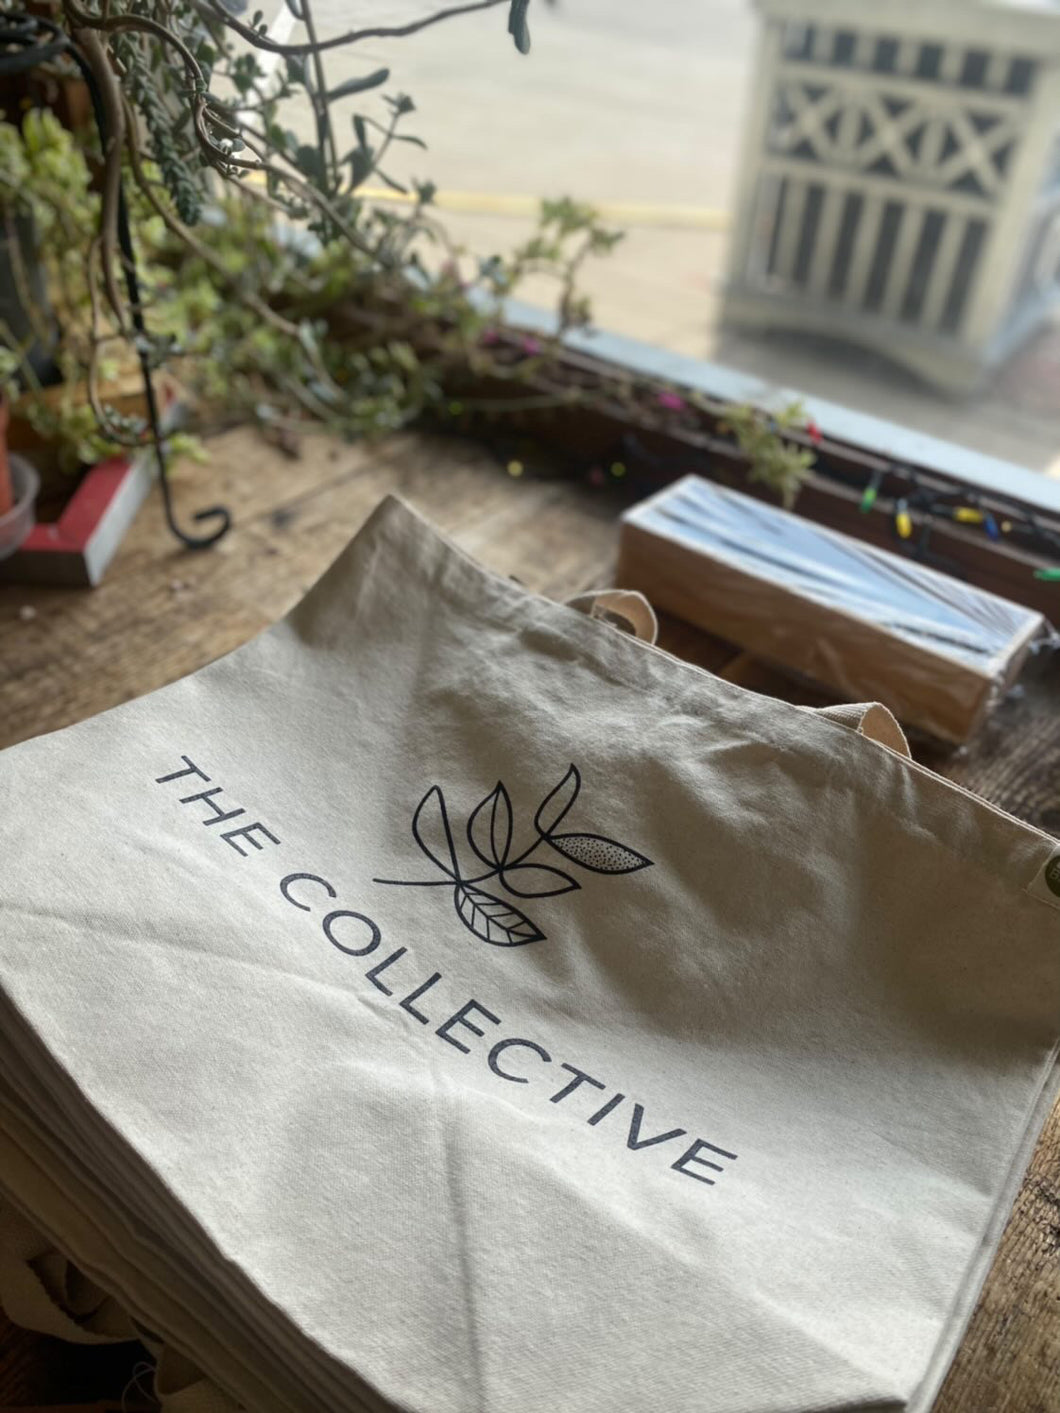 THE COLLECTIVE Market Tote